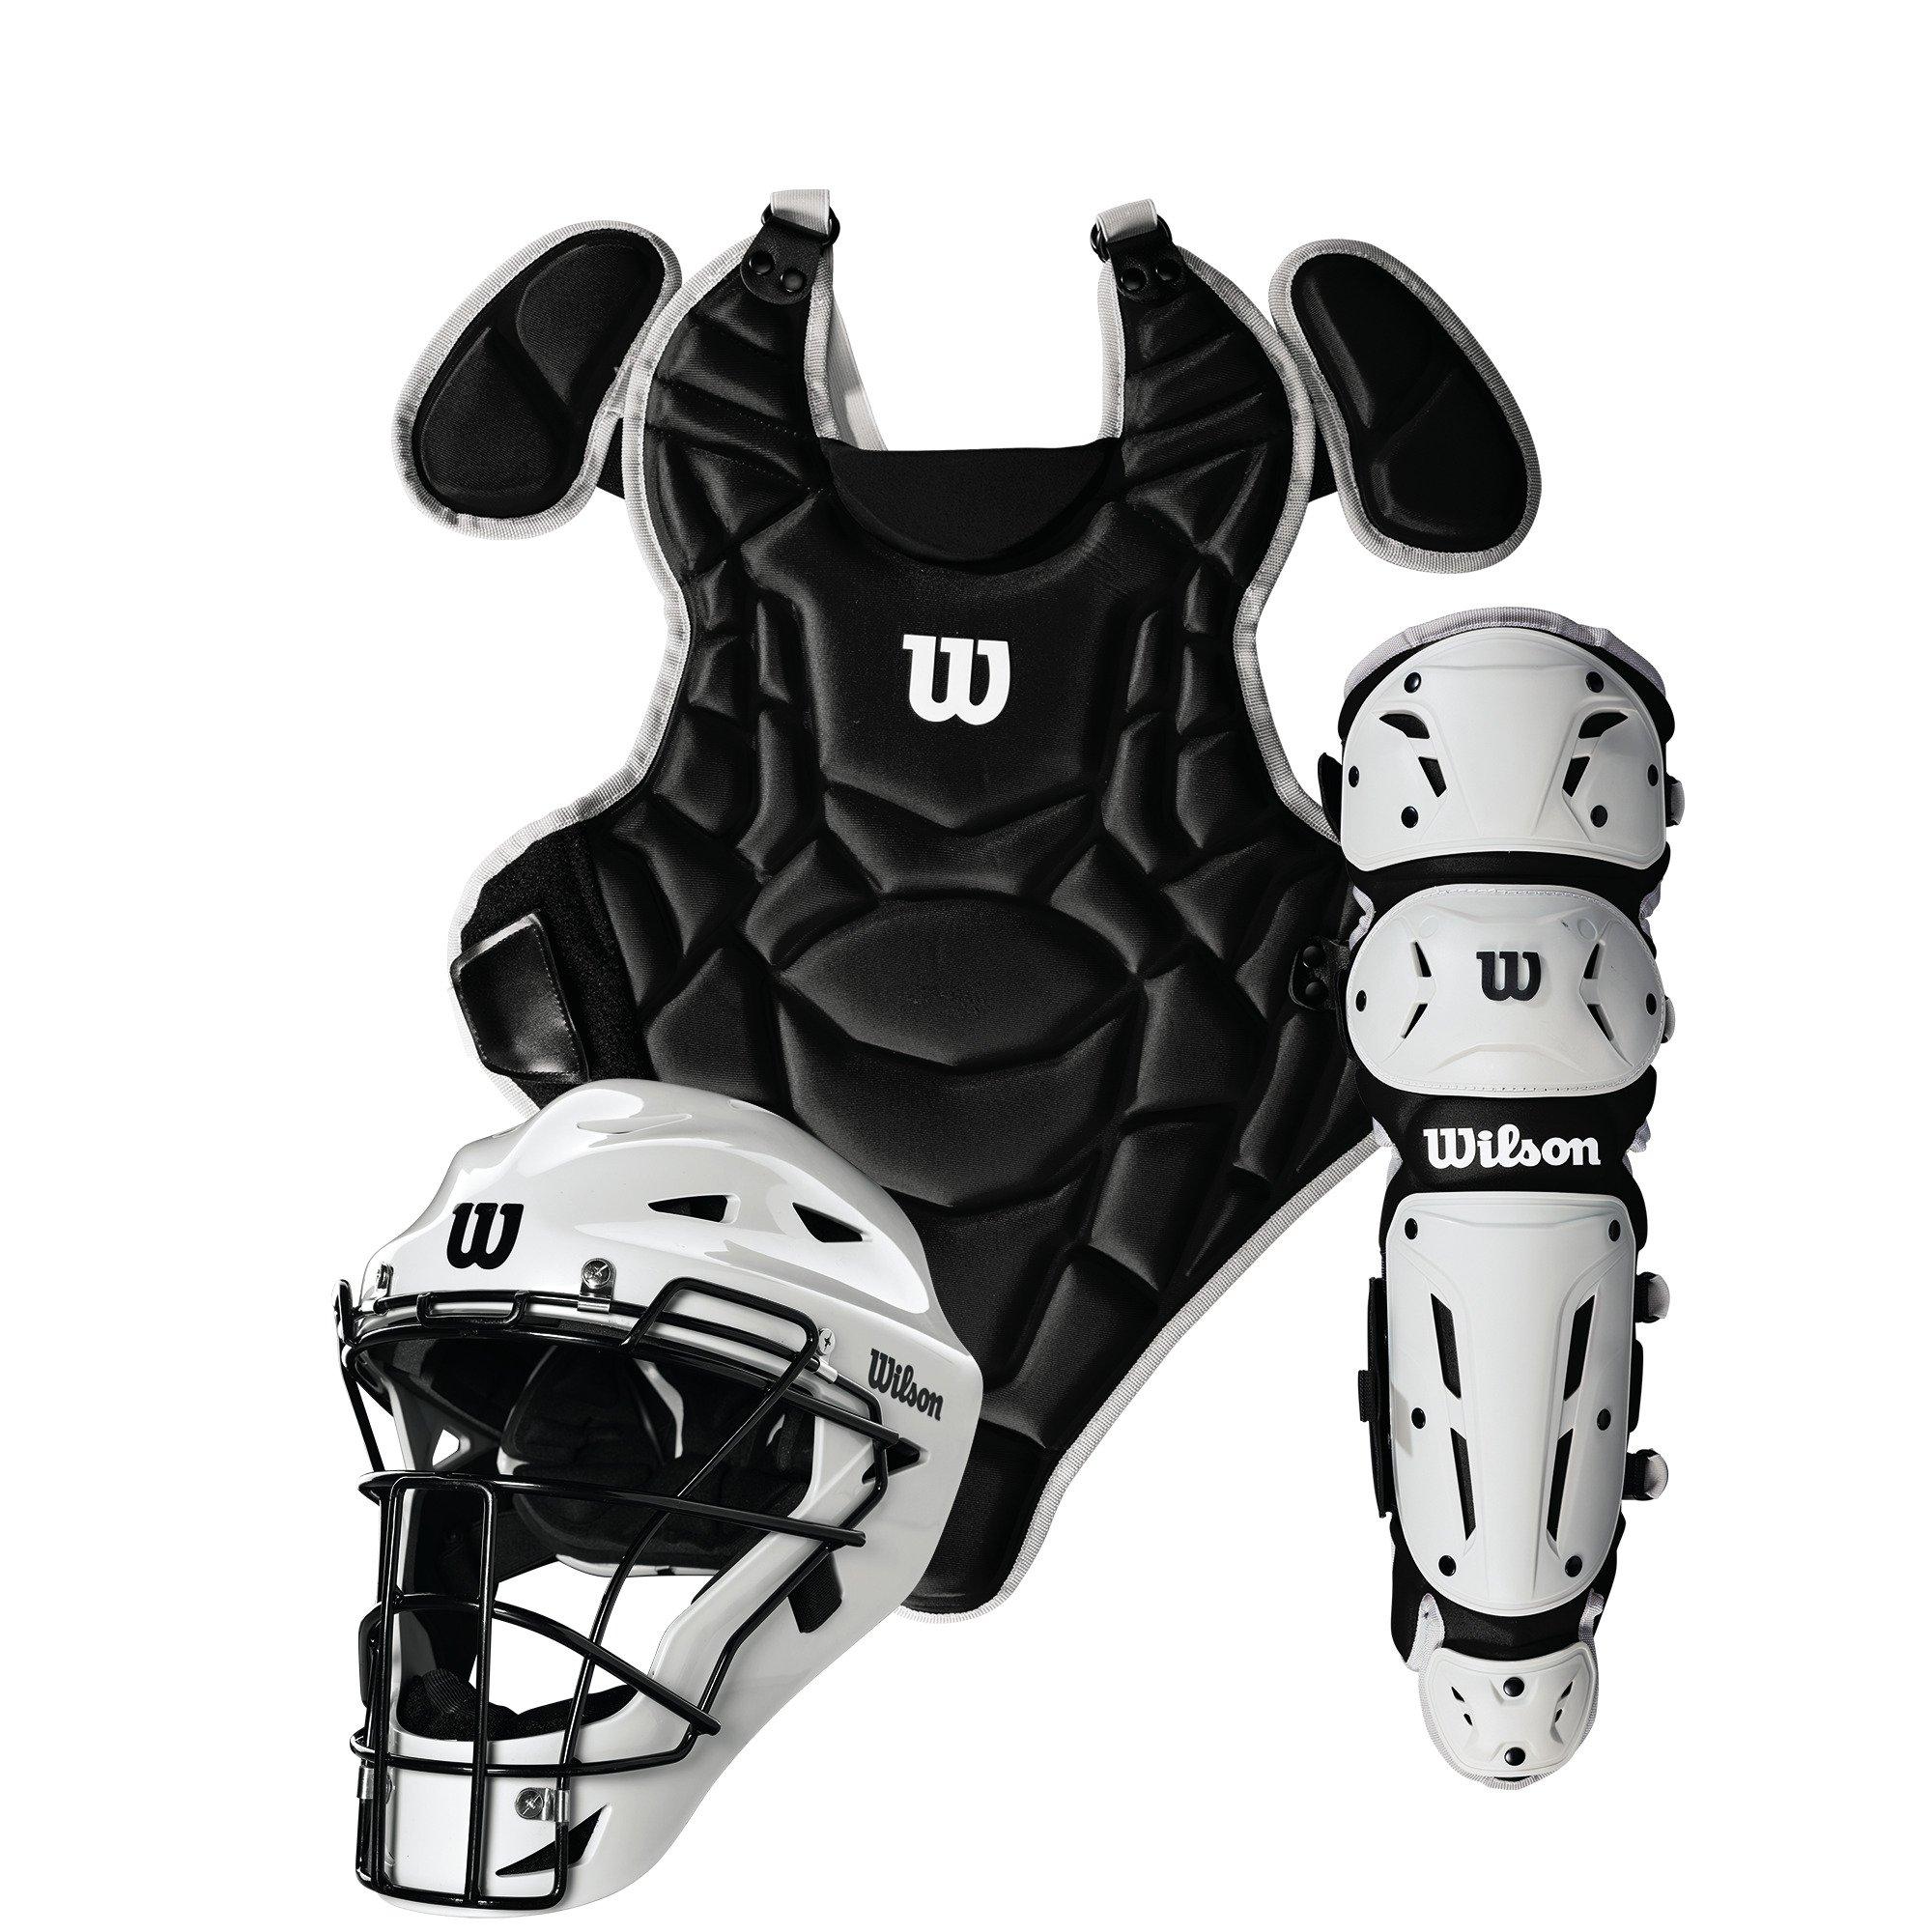 EvoShield Catchers Gear - A Comprehensive Overview & Review